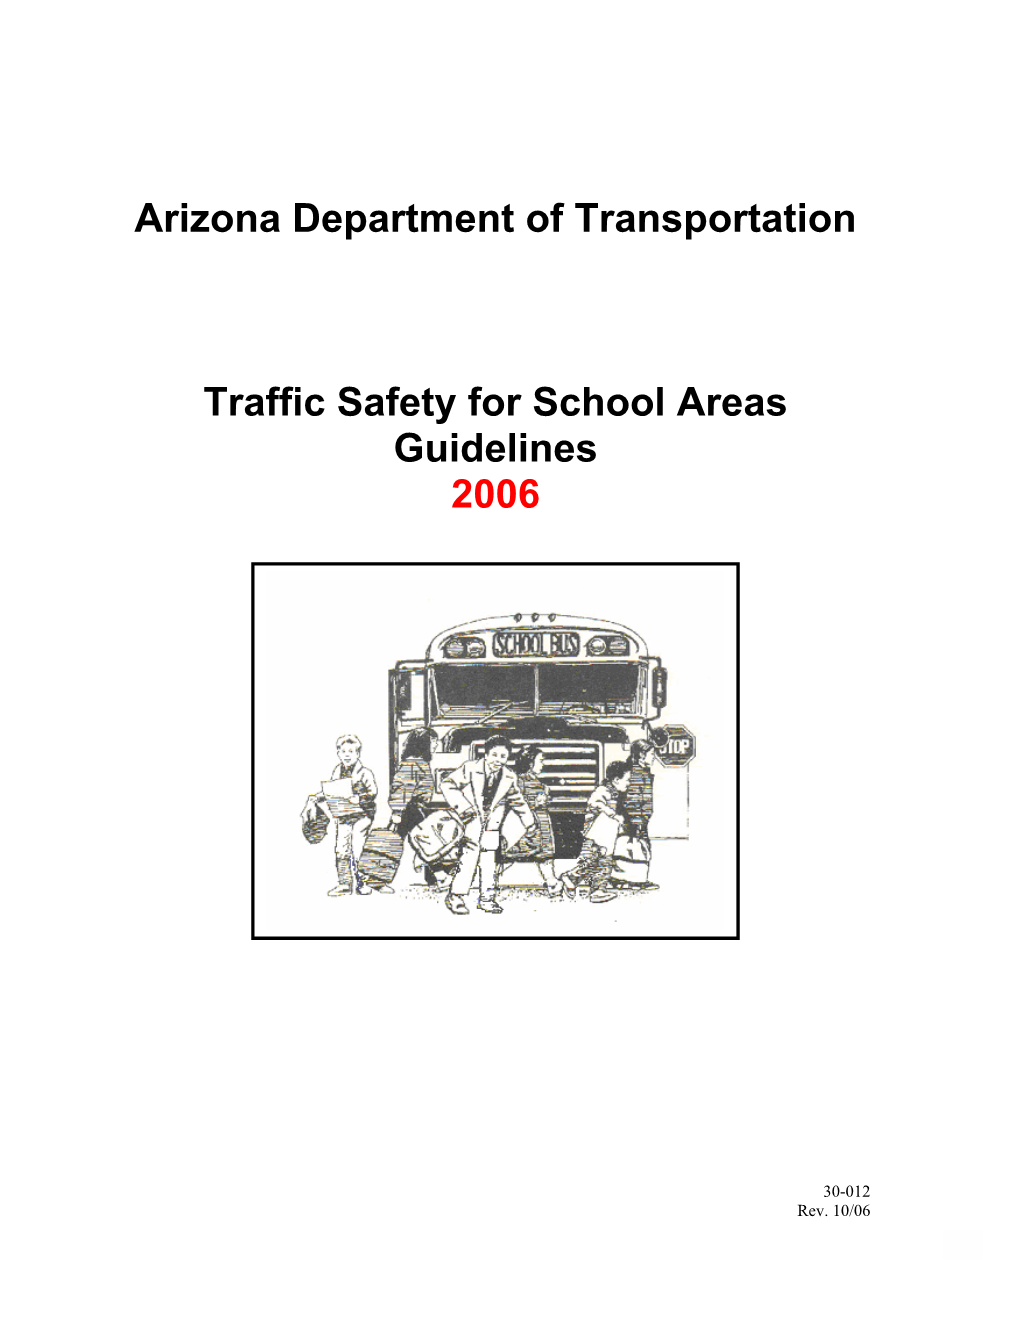 ADOT Traffic Safety for School Area Guidelines